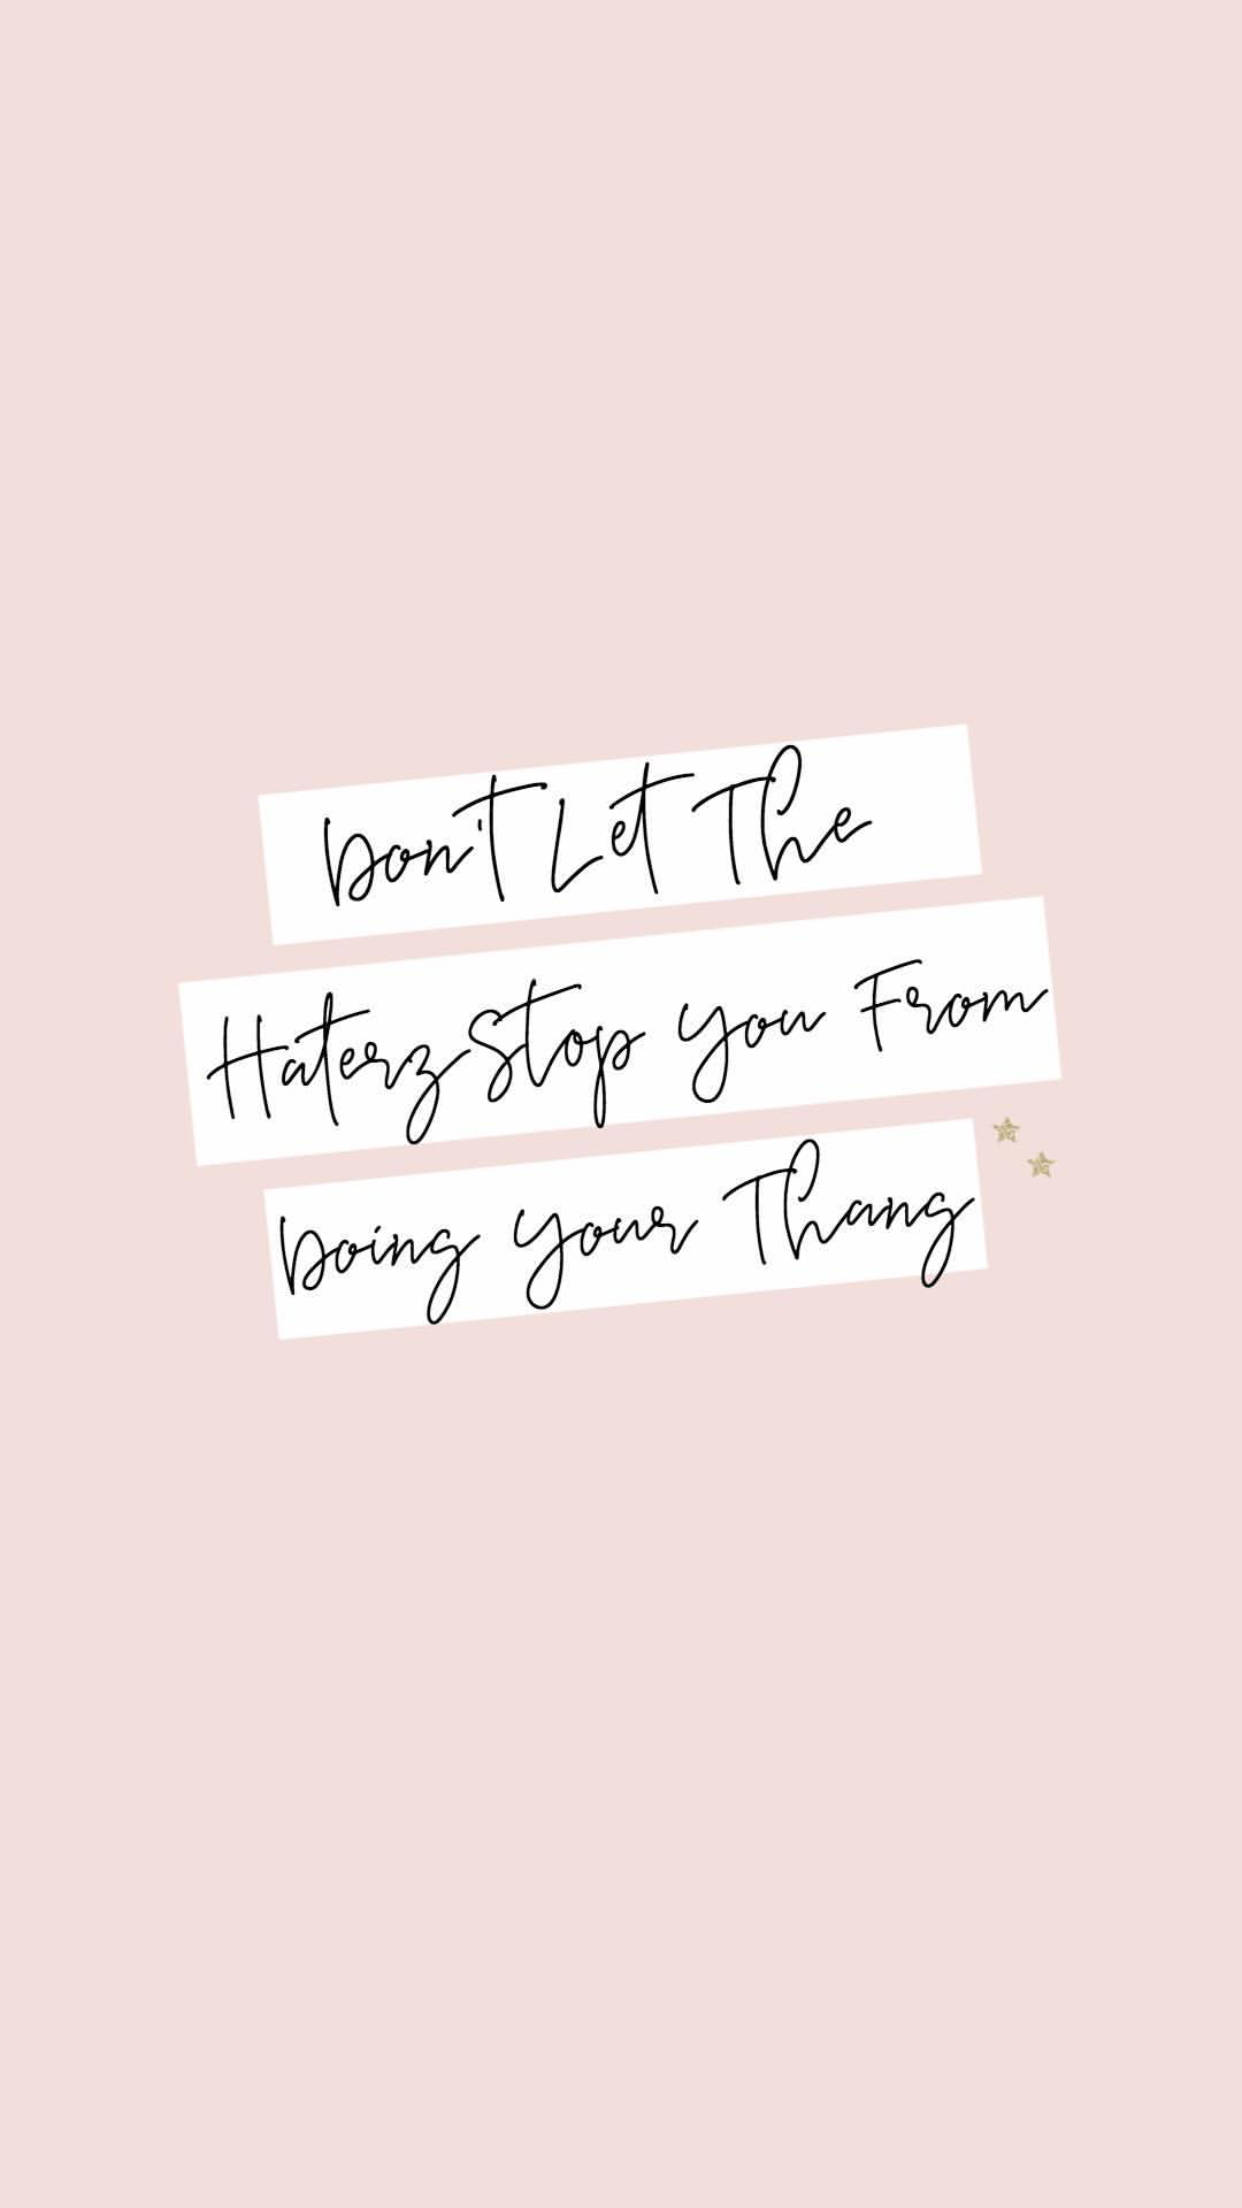 Inspiring Quotes Phone Do Your Thang Wallpaper